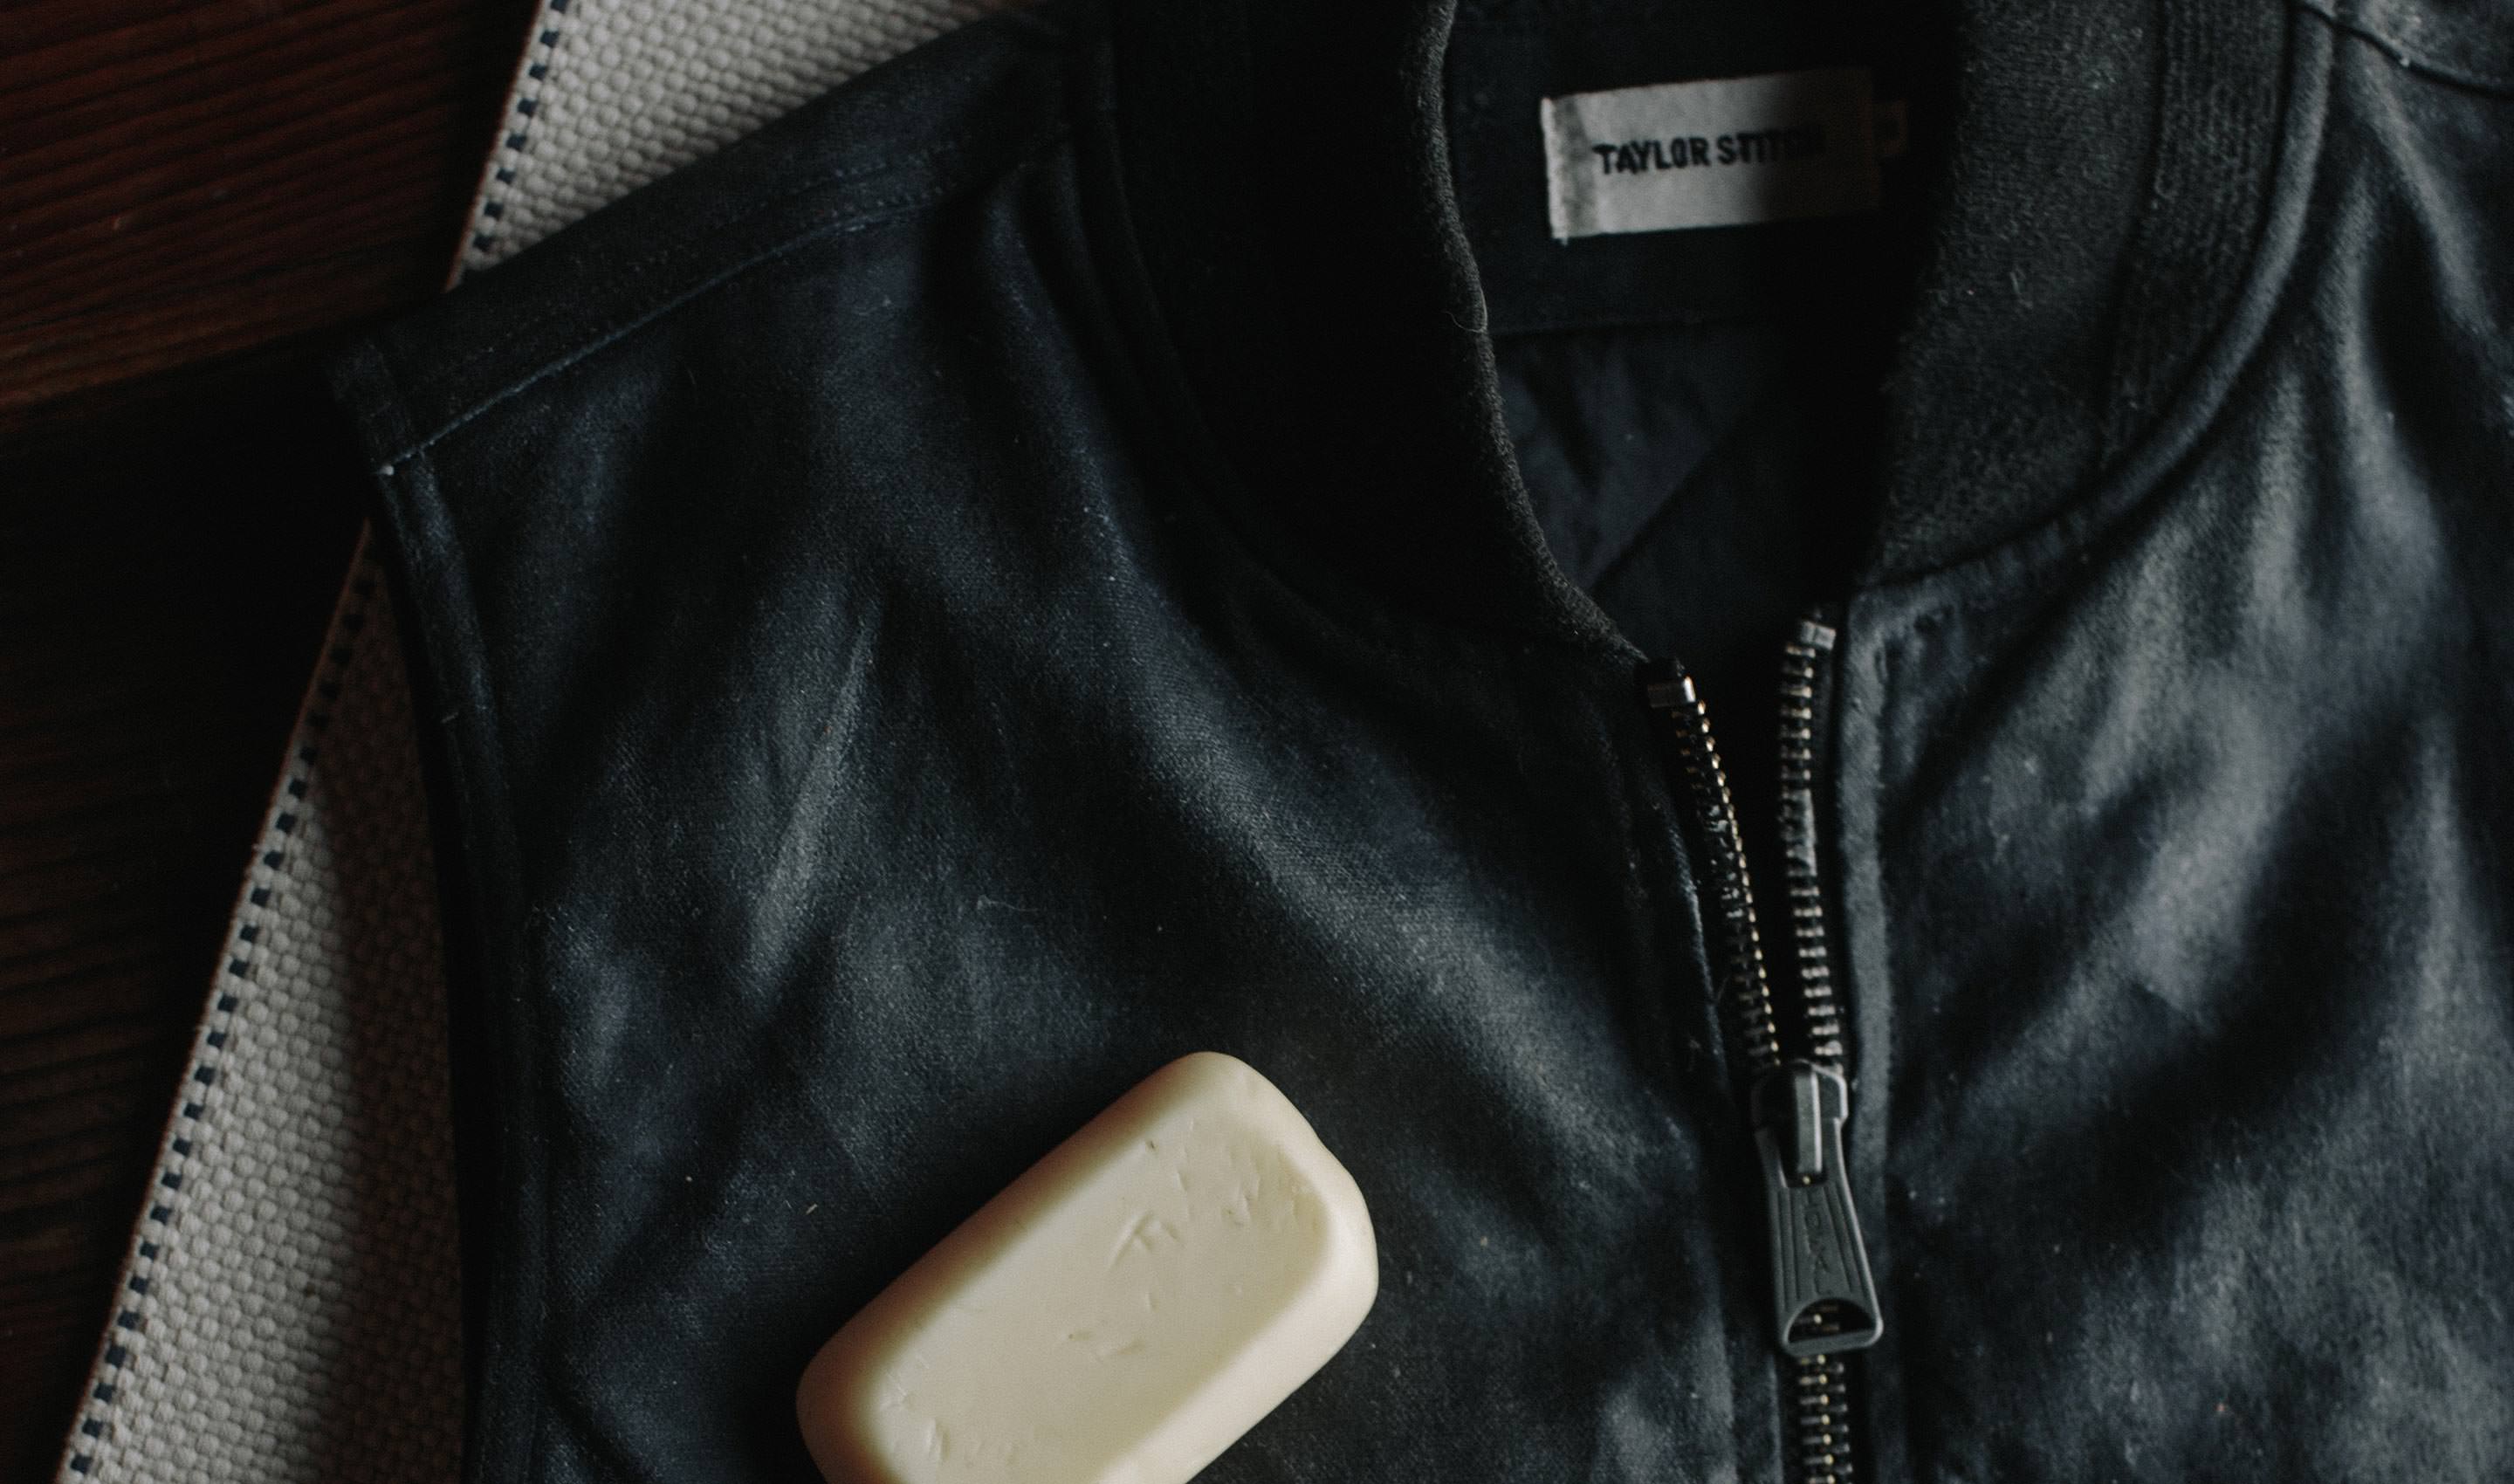 How to Re-Wax Your Fall Jacket